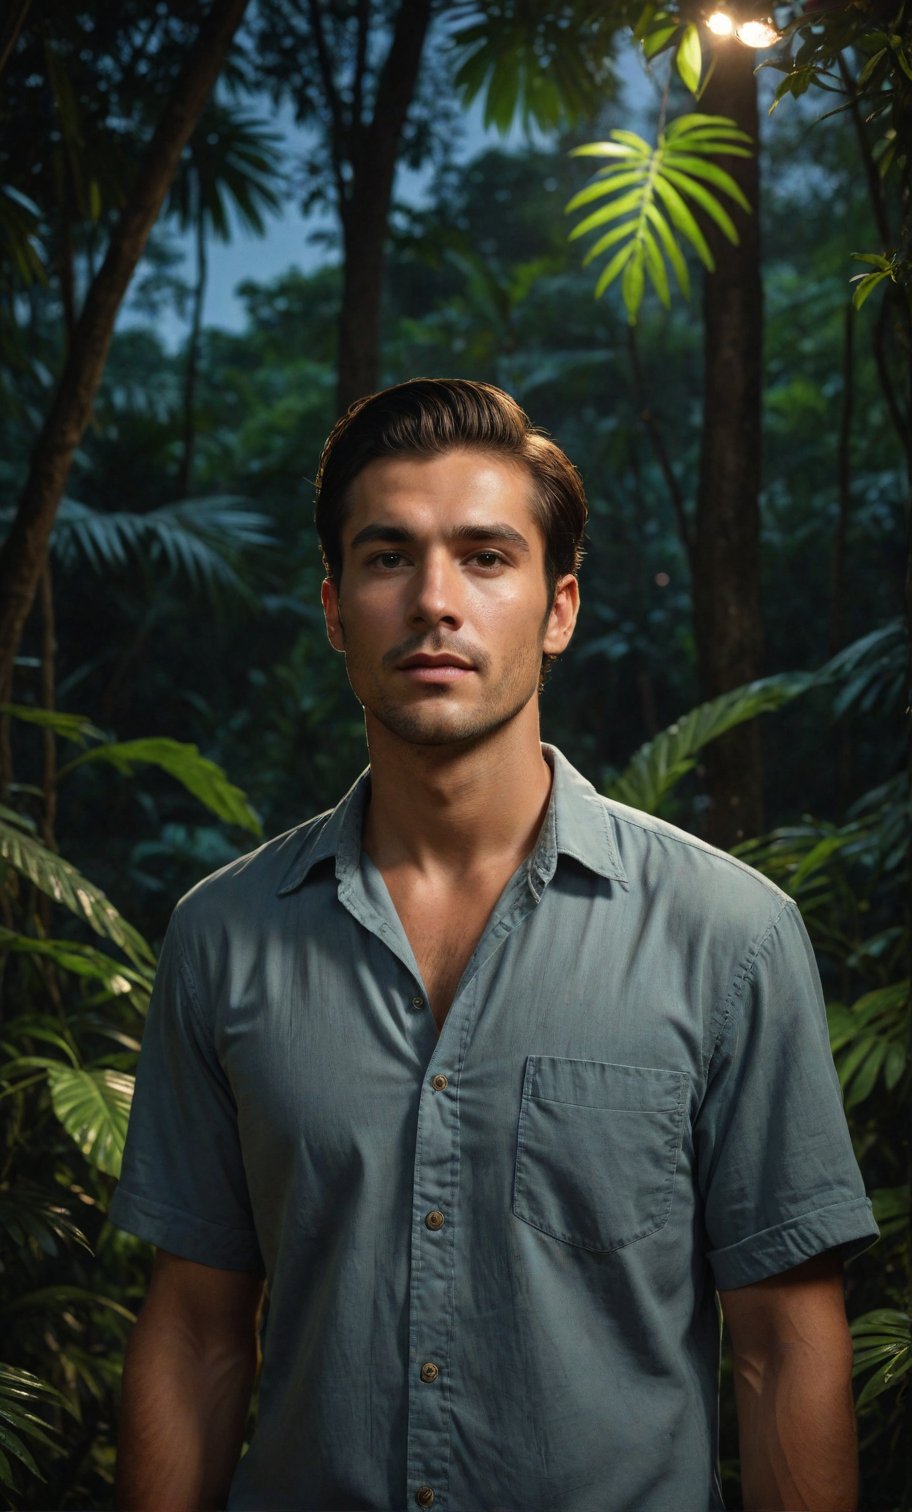 Masterpiece, realistic, lifelike, 1man, side part hairstyle, standing tall at the lush foliage of a dense jungle at night. In medium shot, his face is illuminated by a soft, glistening , alluring light highlighted his face, The darkness surrounding him , wearing shirt, scenery, bark night , really many Fireflies fly around, sending out a twinkling light backdrop, middle contrast 